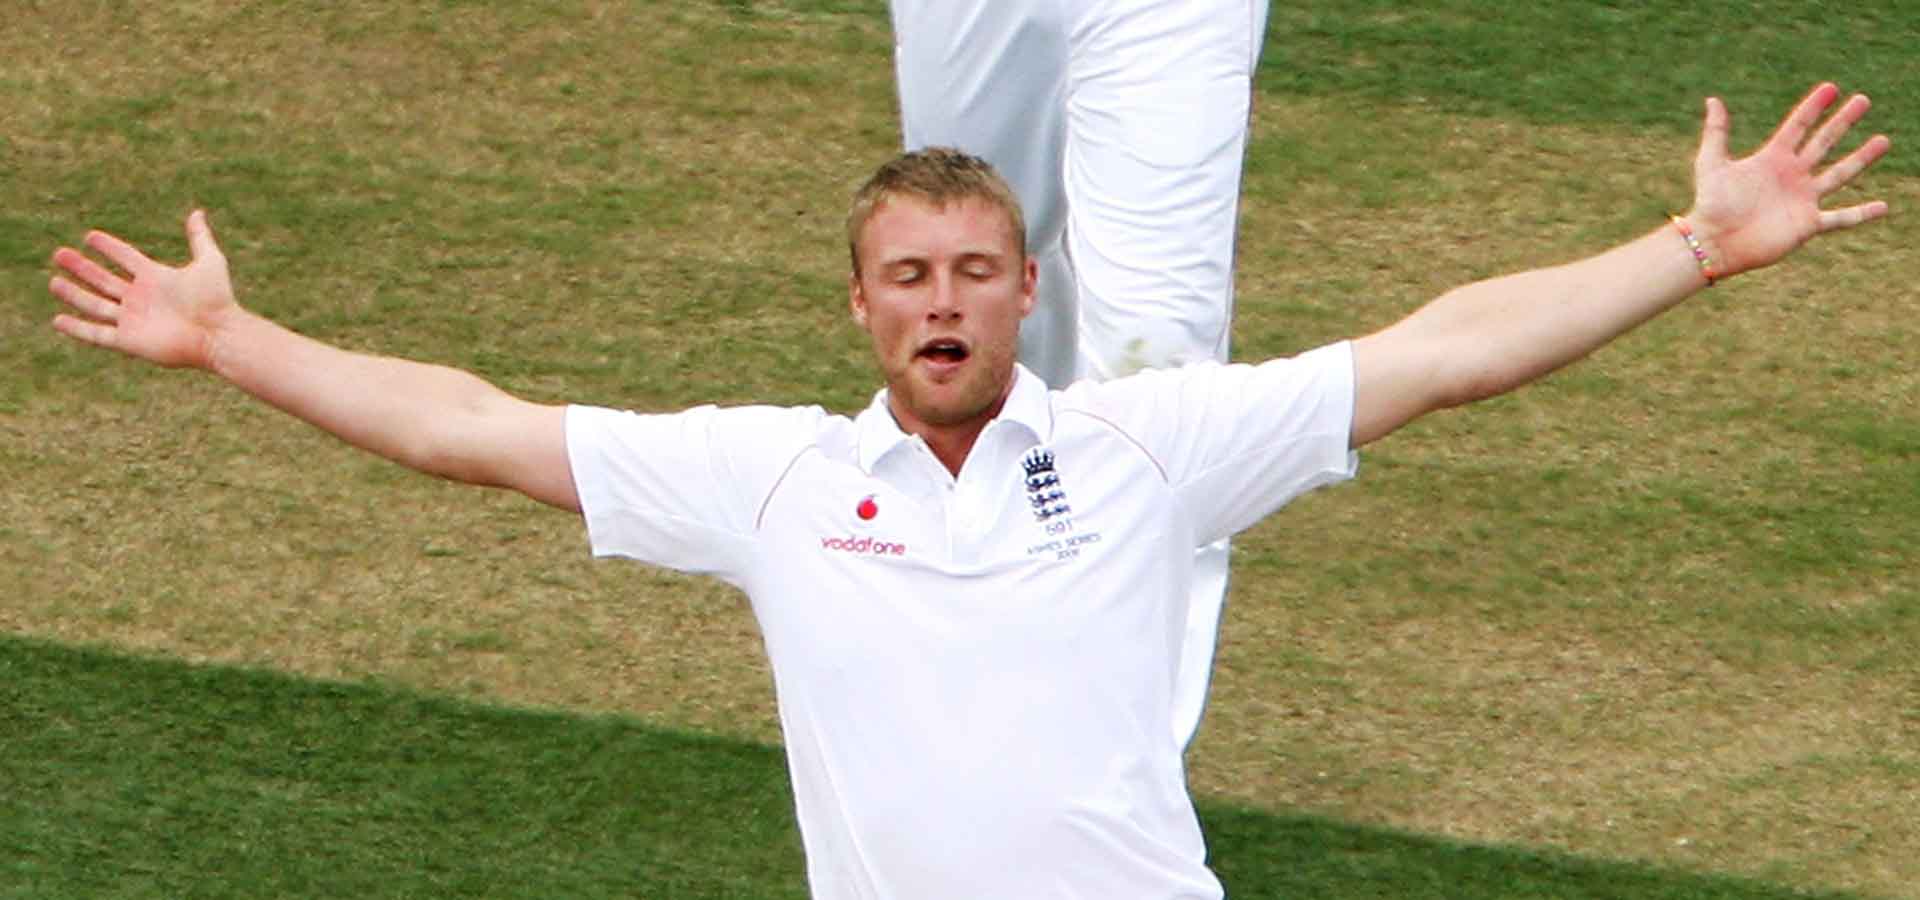 Andrew Flintoff celebrates at Lord's in 2009